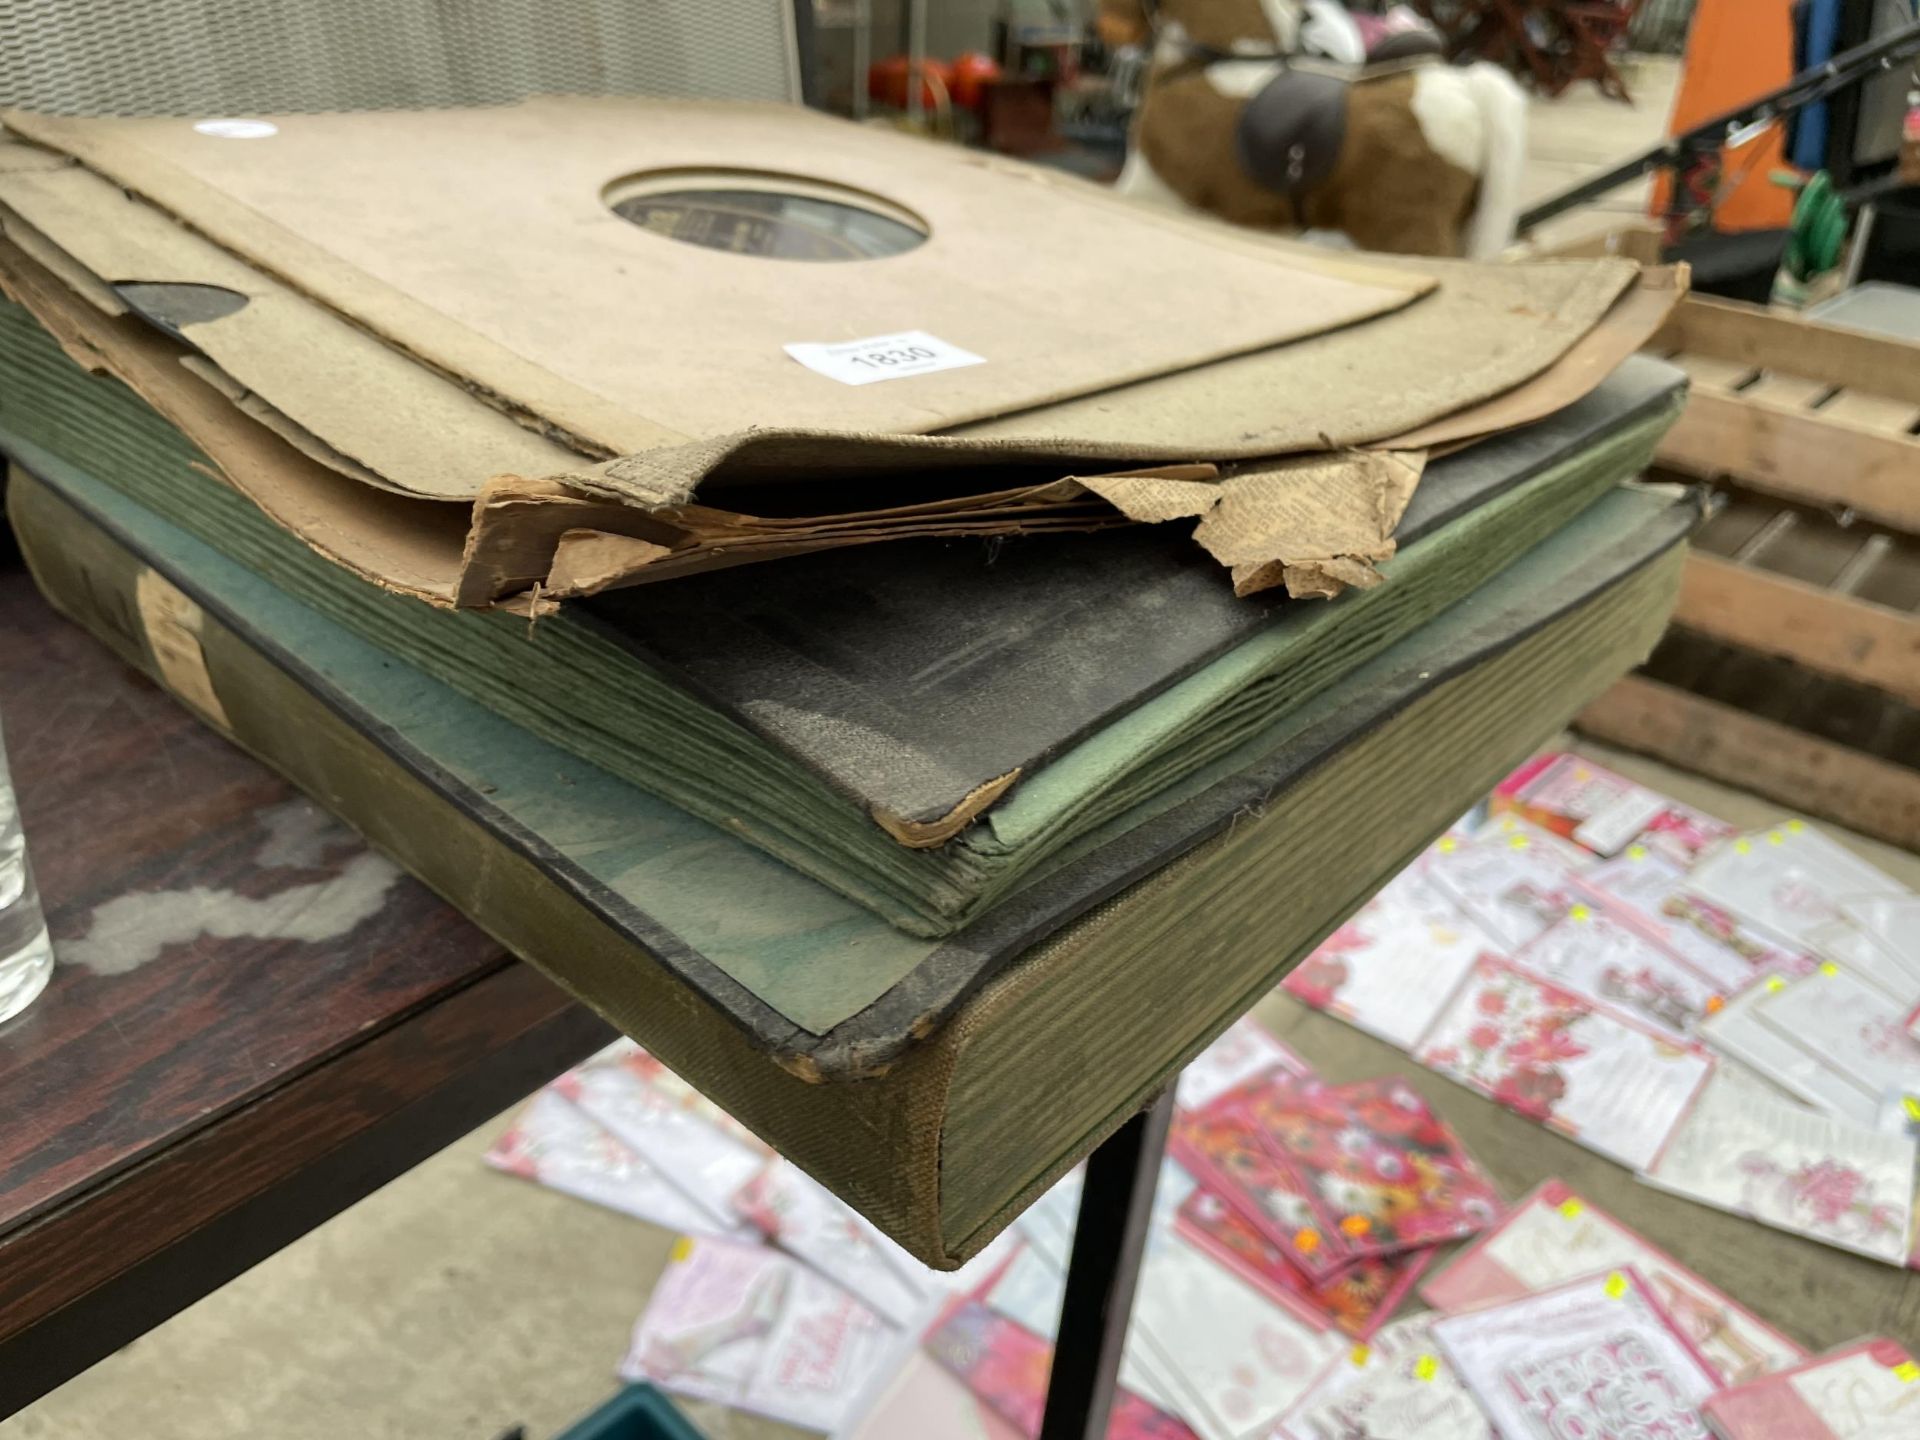 A VINTAGE HACKER PORTABLE RECORD PLAYER WITH AN ASSORTMENT OF LP RECORDS - Image 3 of 3